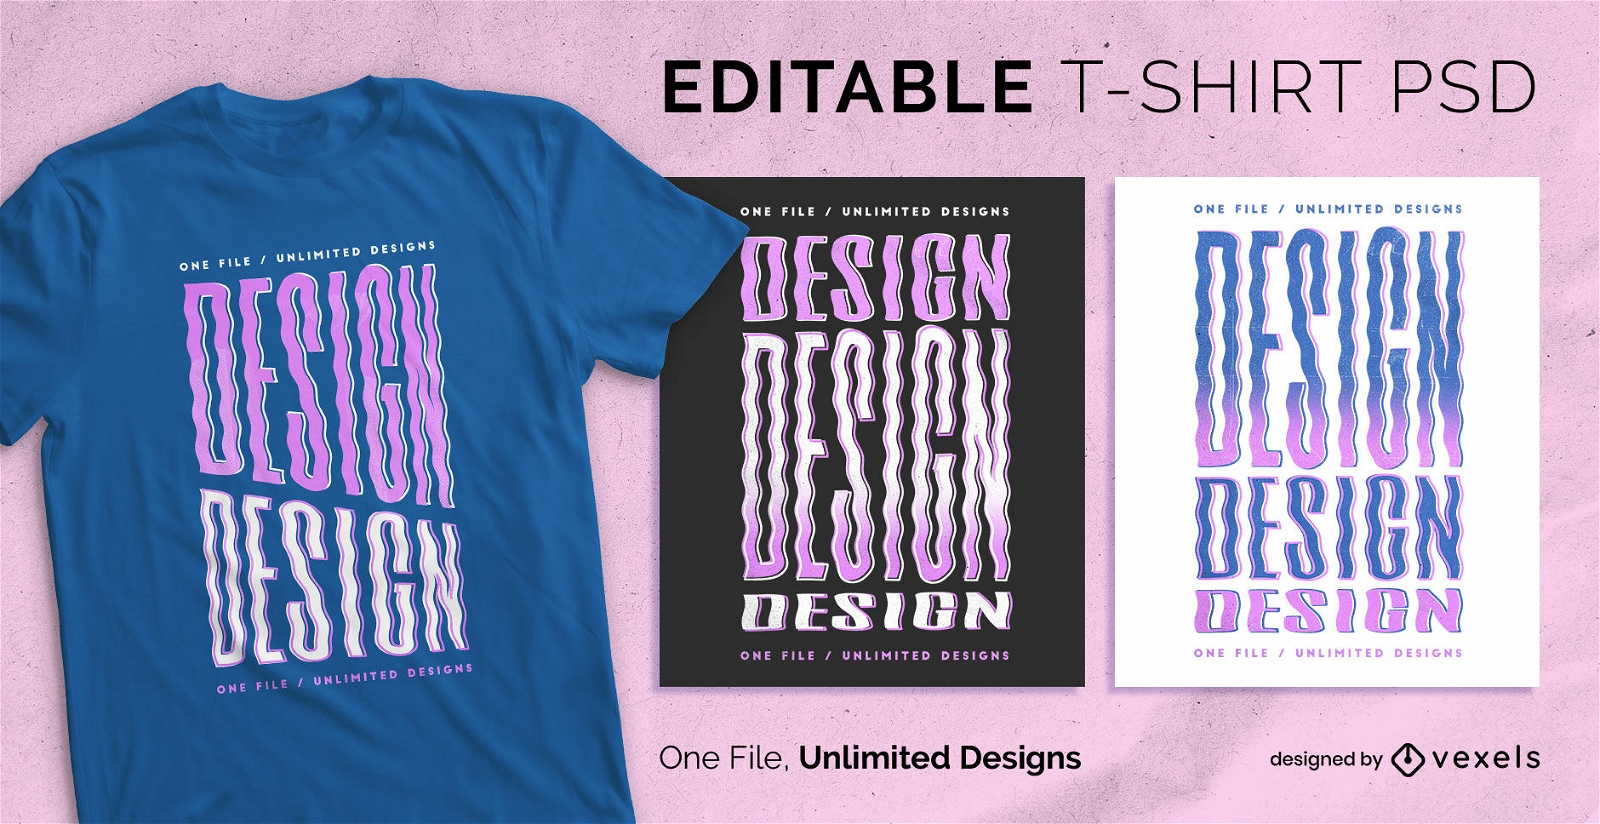 Groovy gradient effect scalable t-shirt psd